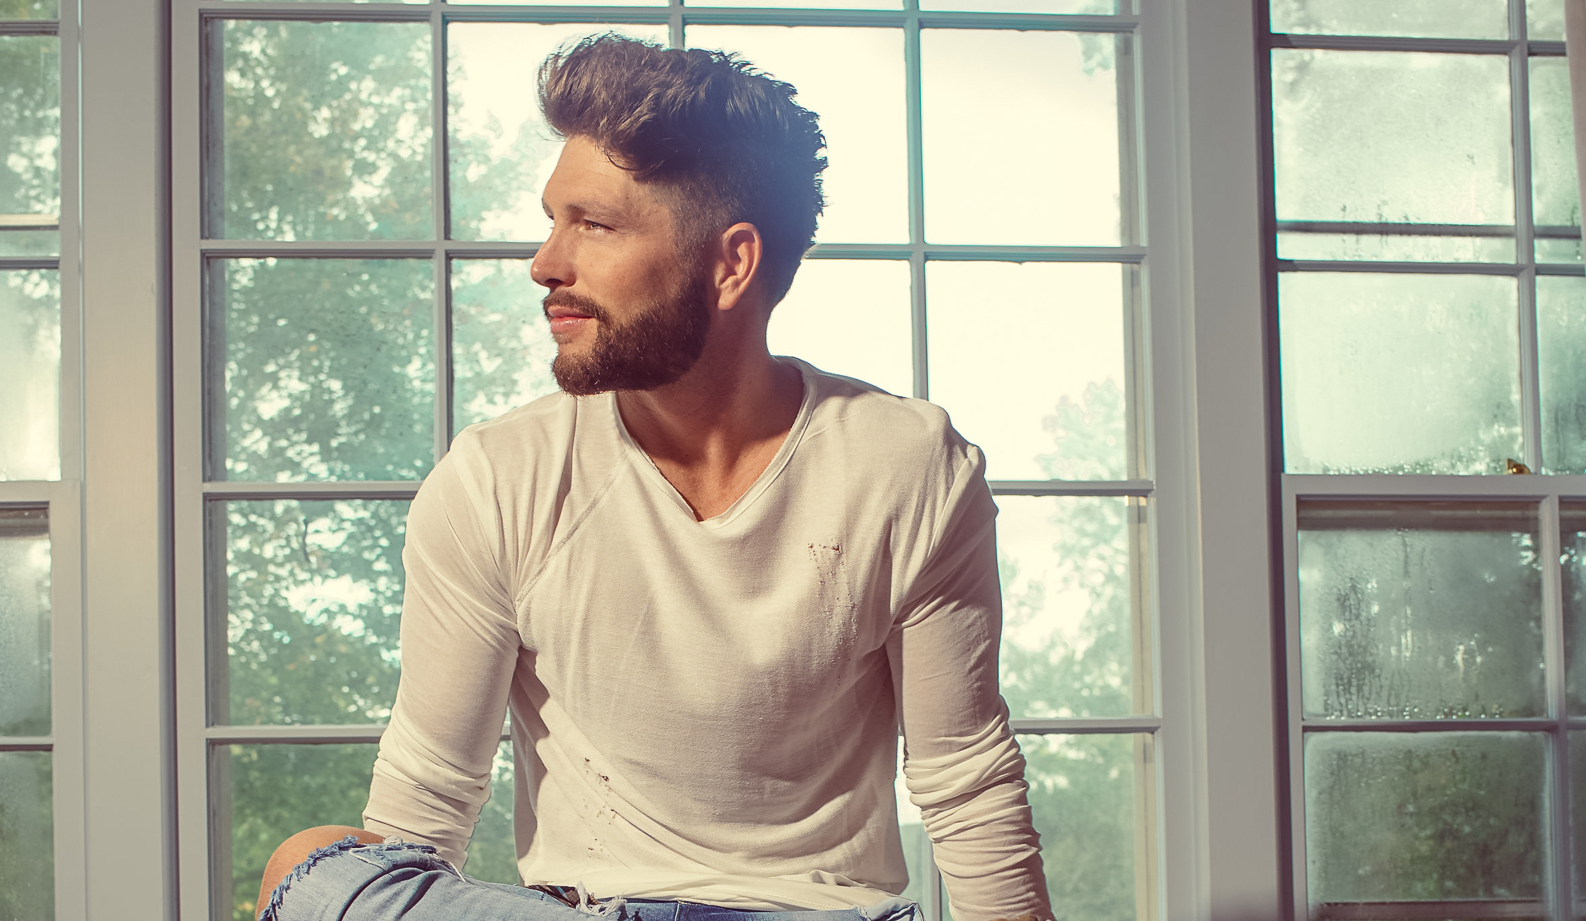 Chris Lane Drops Another New Song from New Album – Listen to “I Don’t Know About You” Now